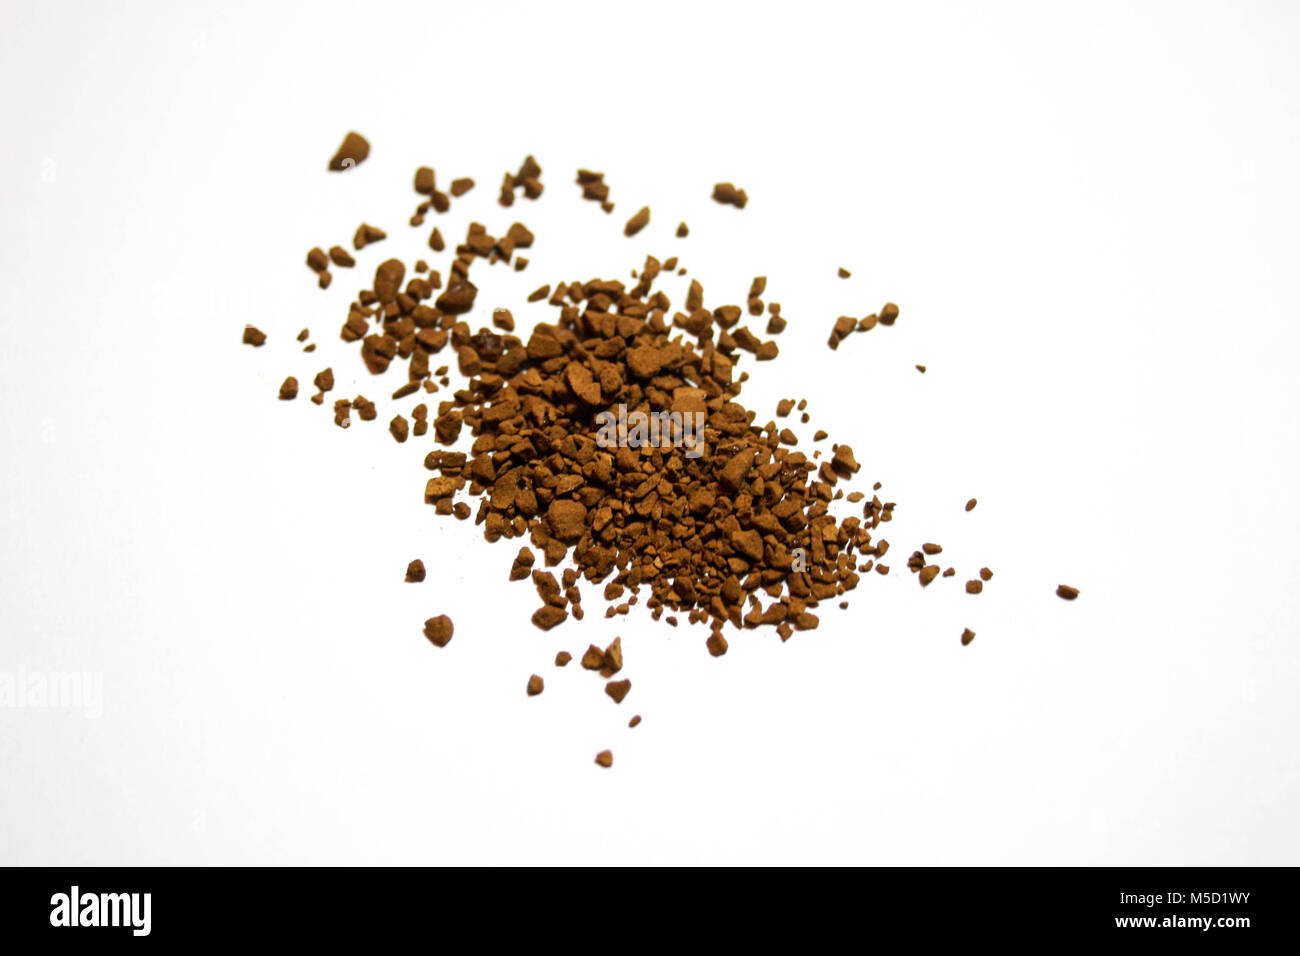 Heap pile of brown coffee granules, on white studio background, close up Stock Photo